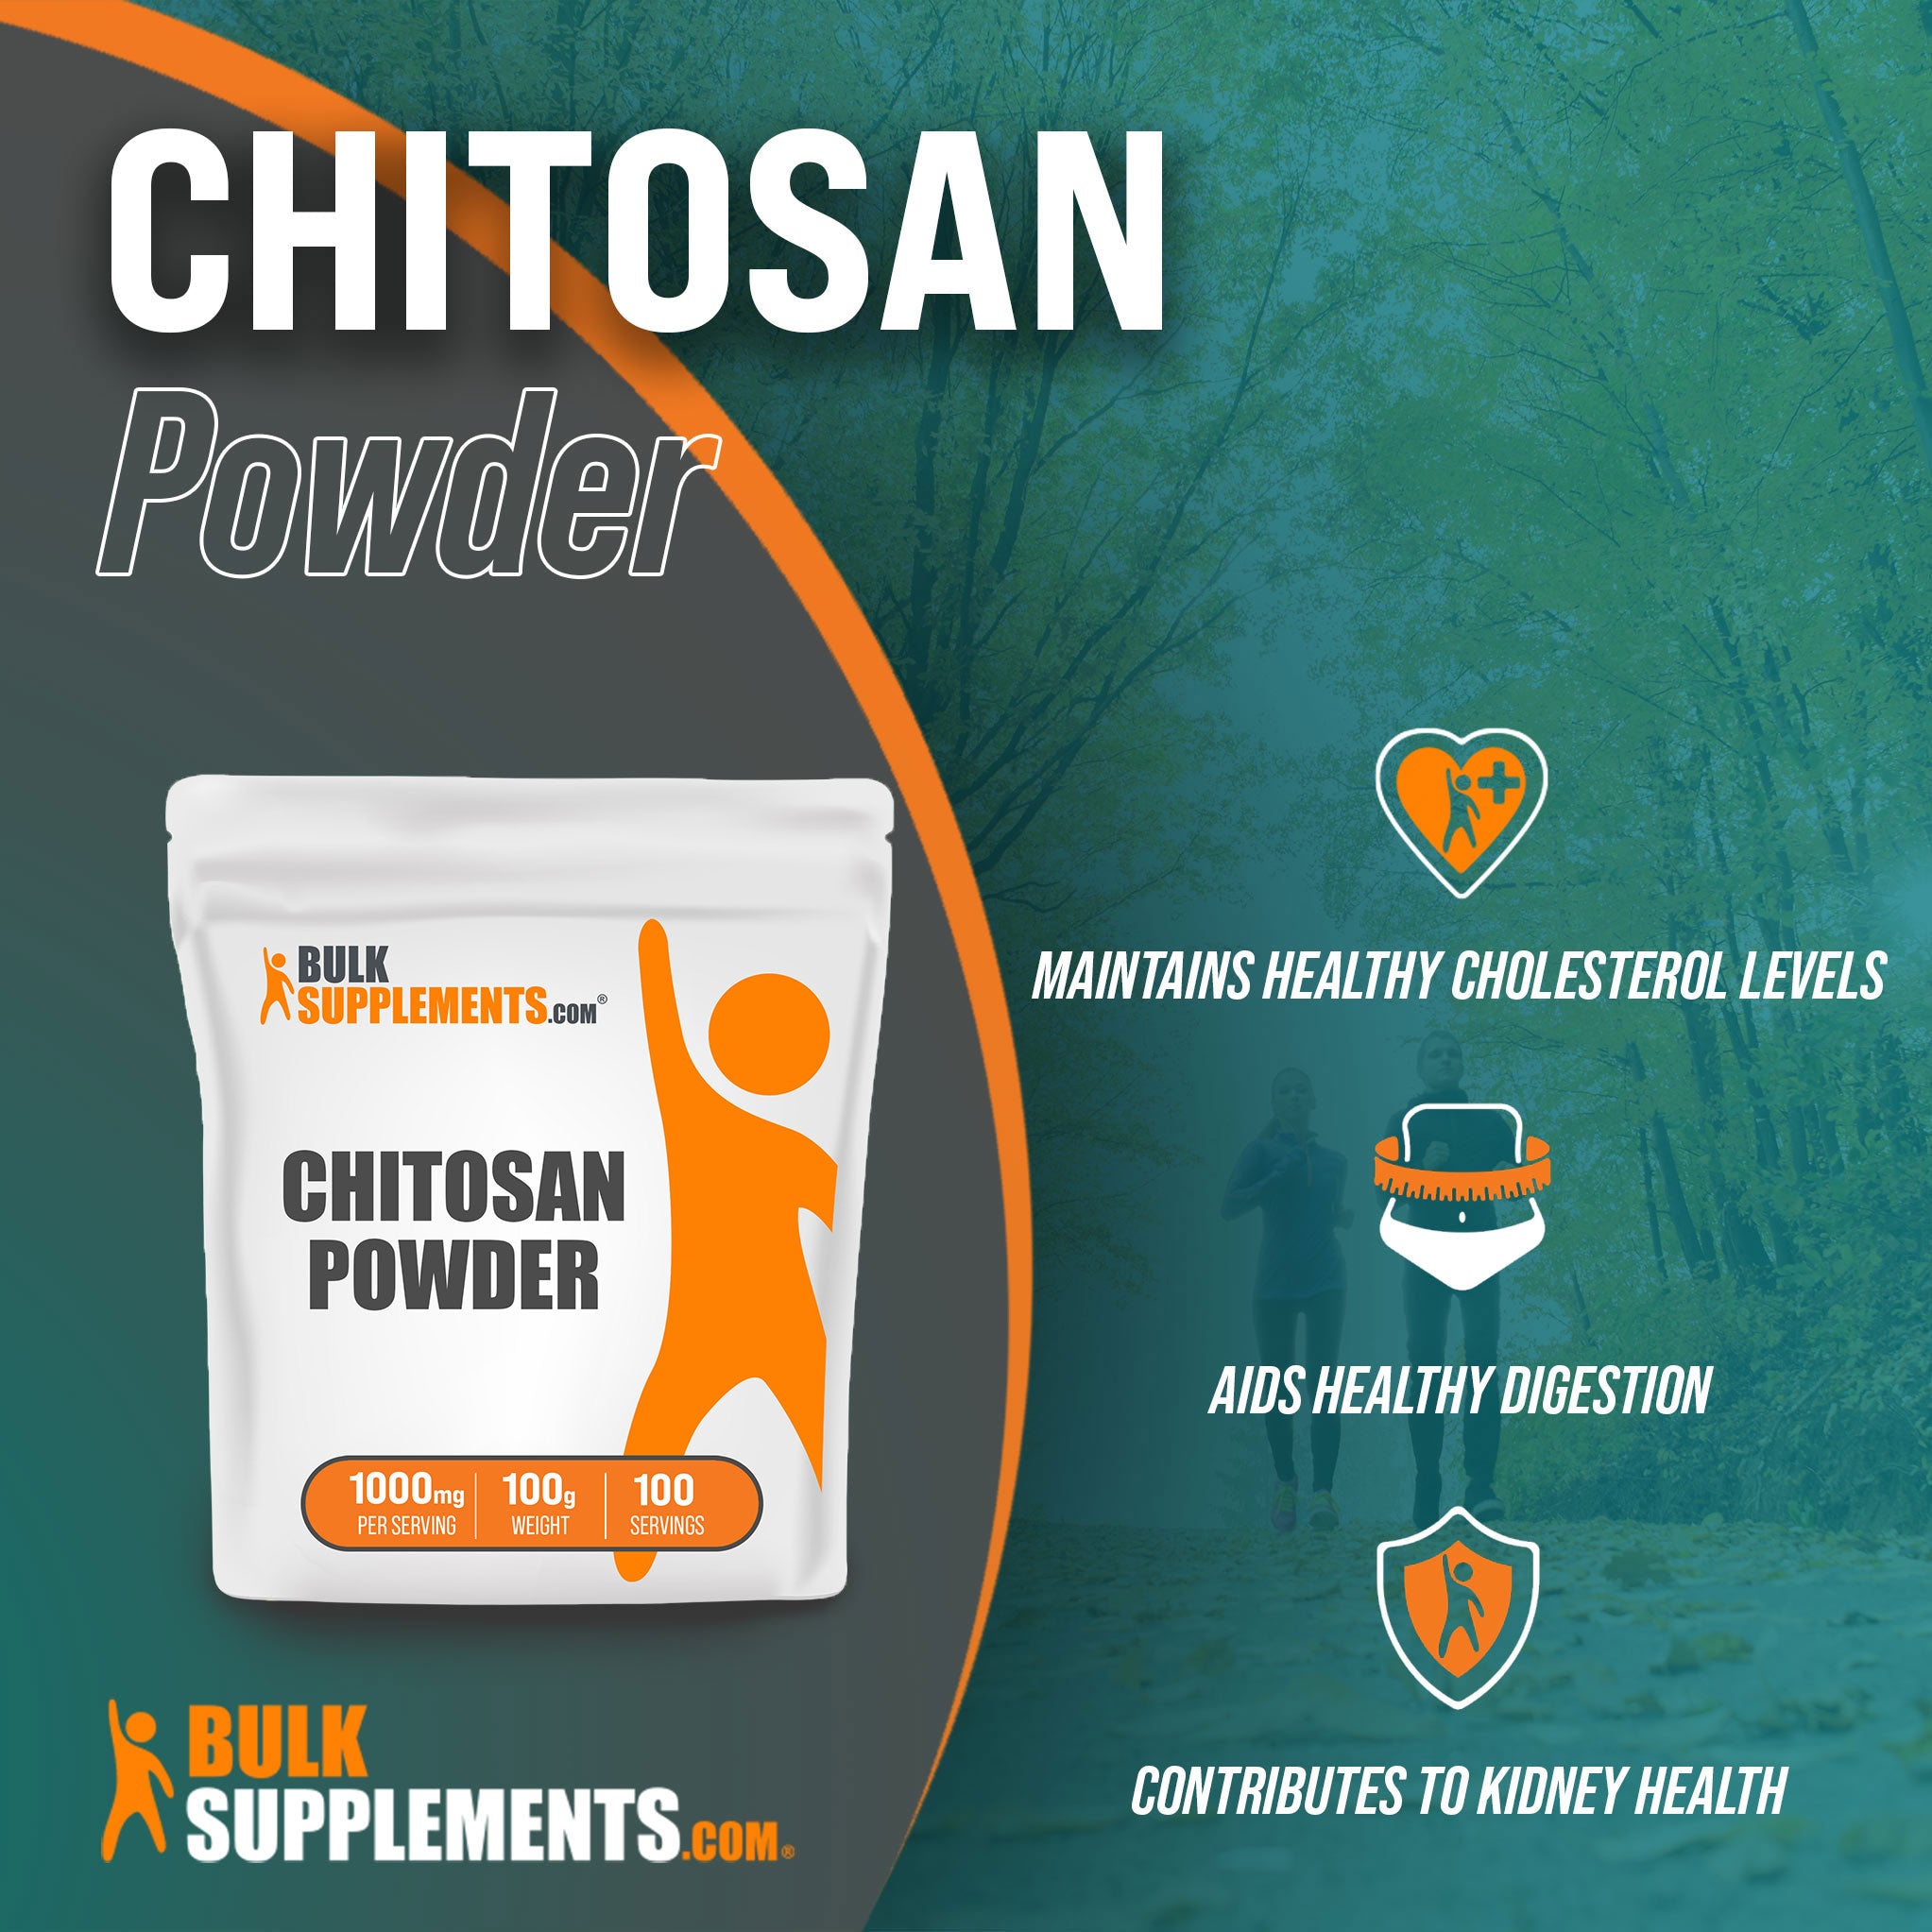 100g Chitosan Powder fiber supplement; maintains healthy cholesterol levels, aids healthy digestion, contributes to kidney health